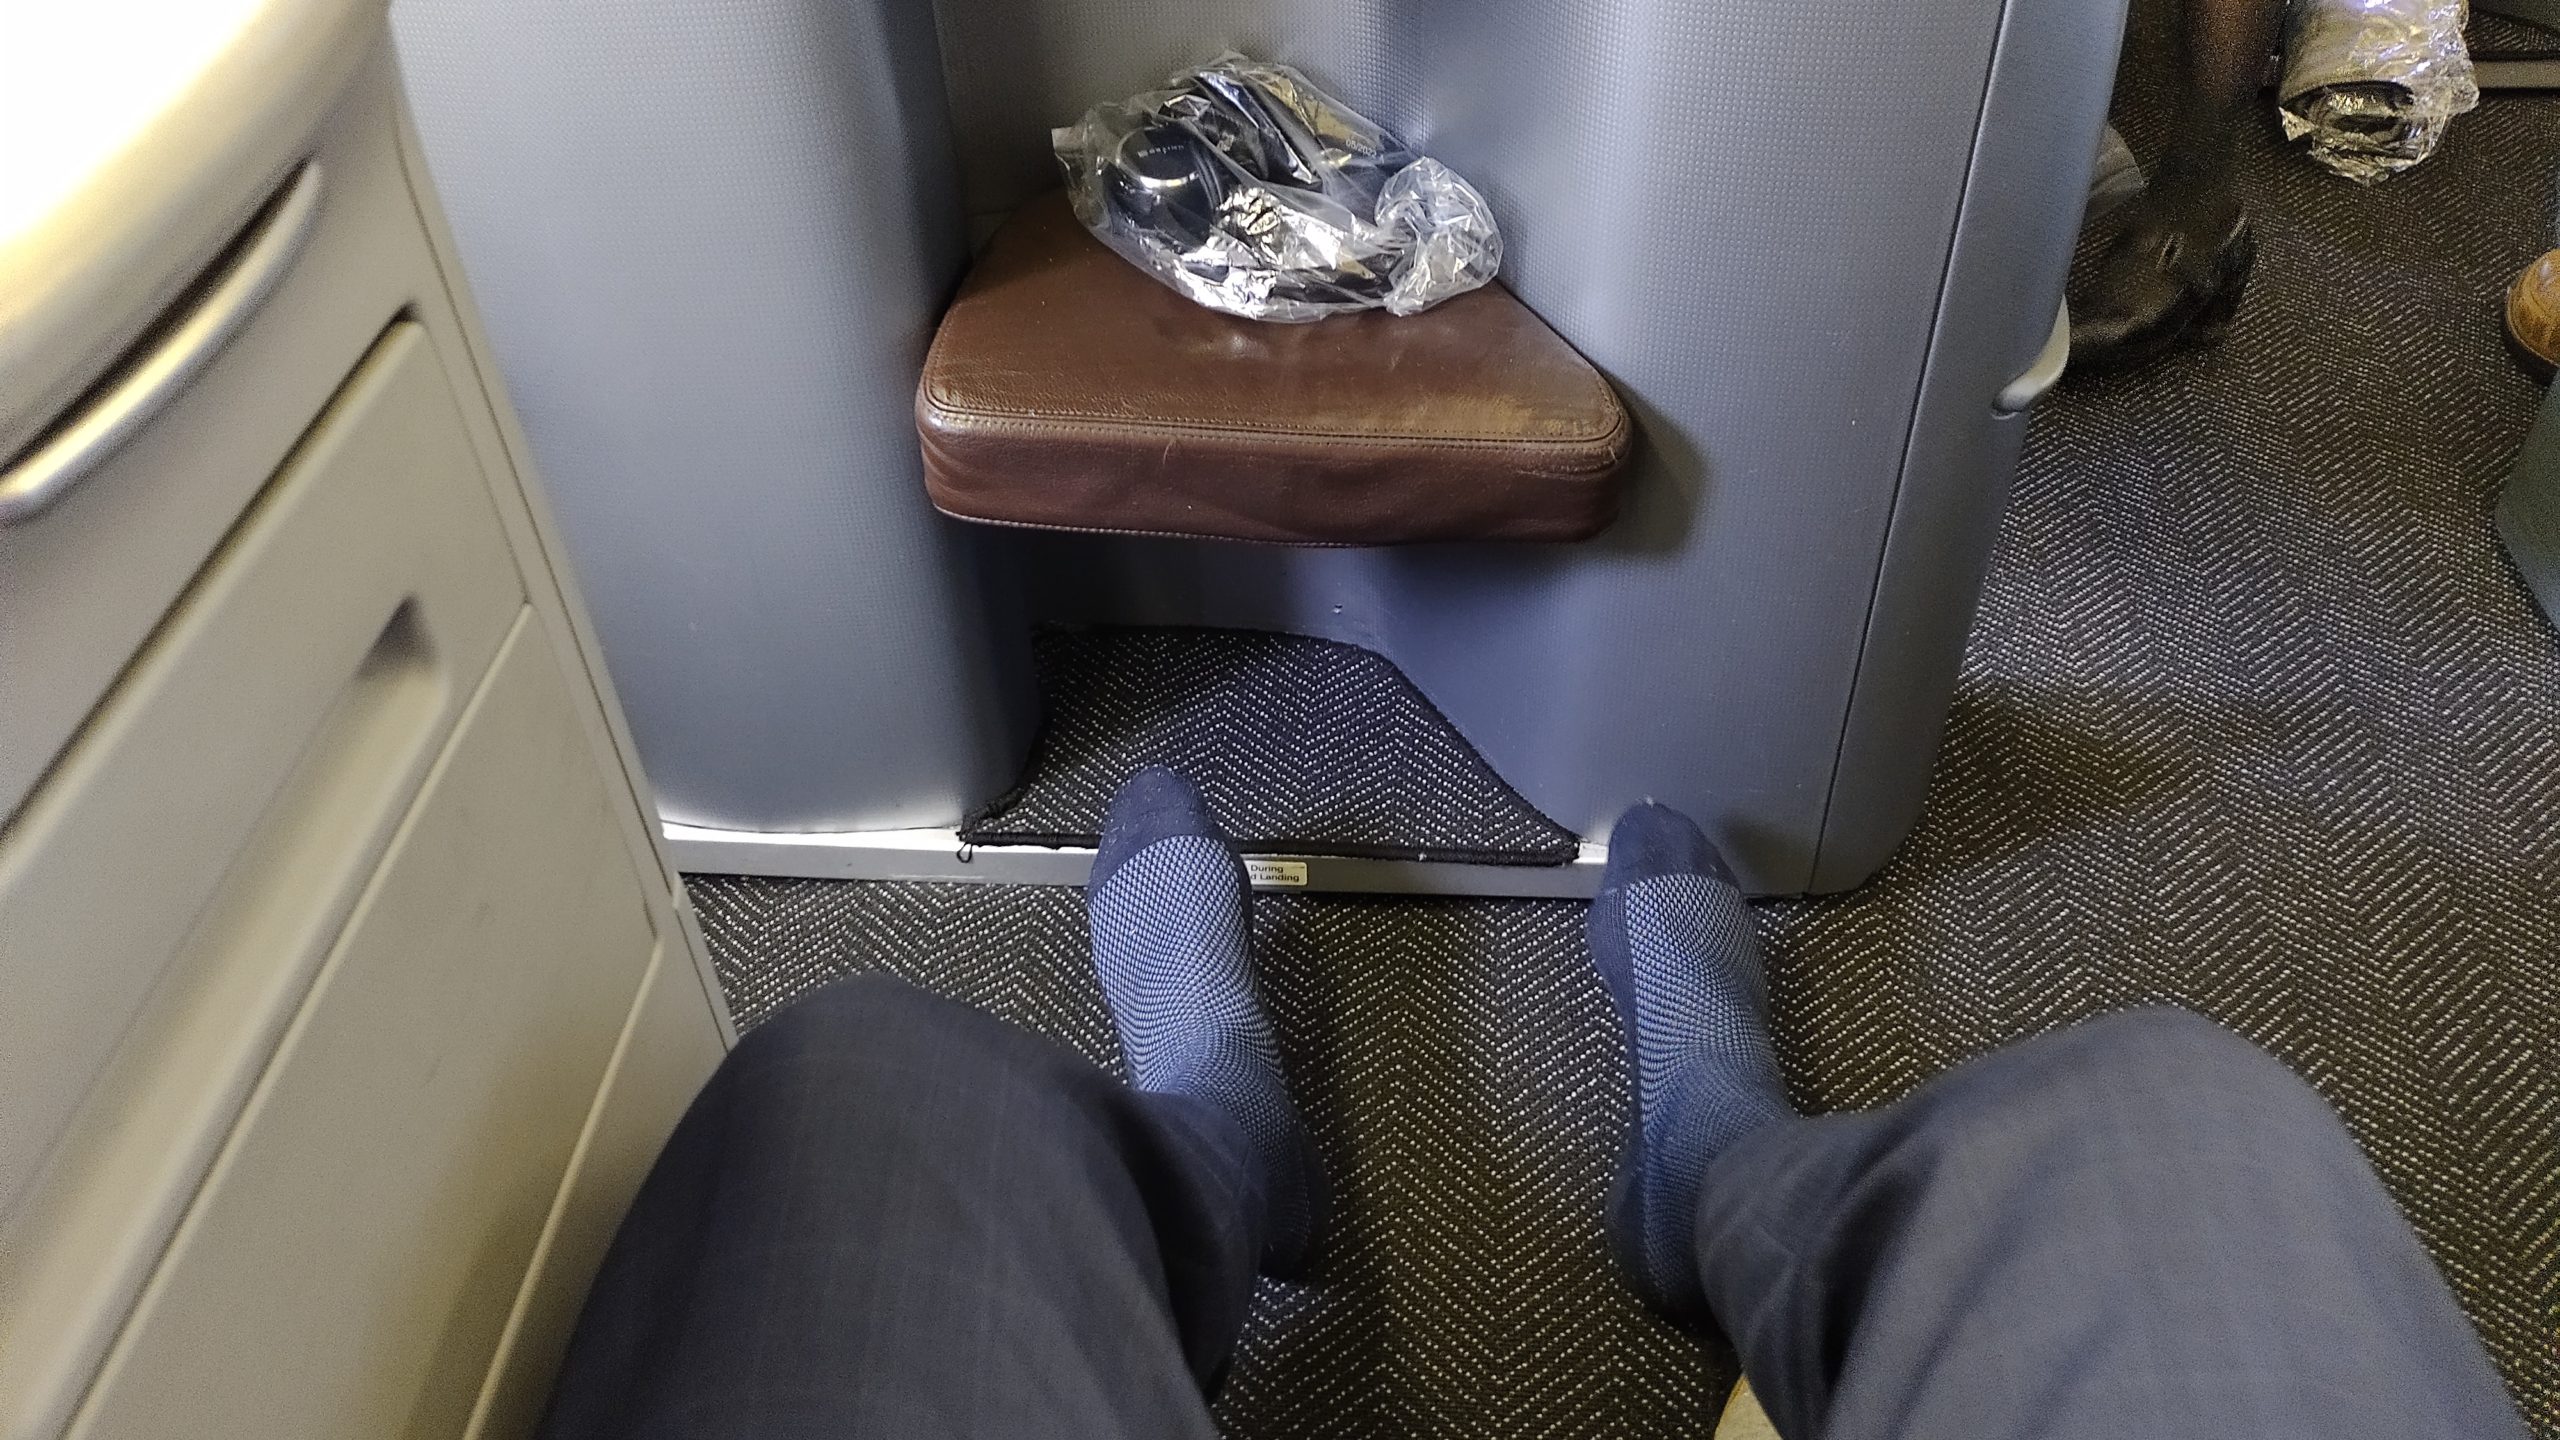 PICTURE OF THE LEG ROOM IN MY SEAT.